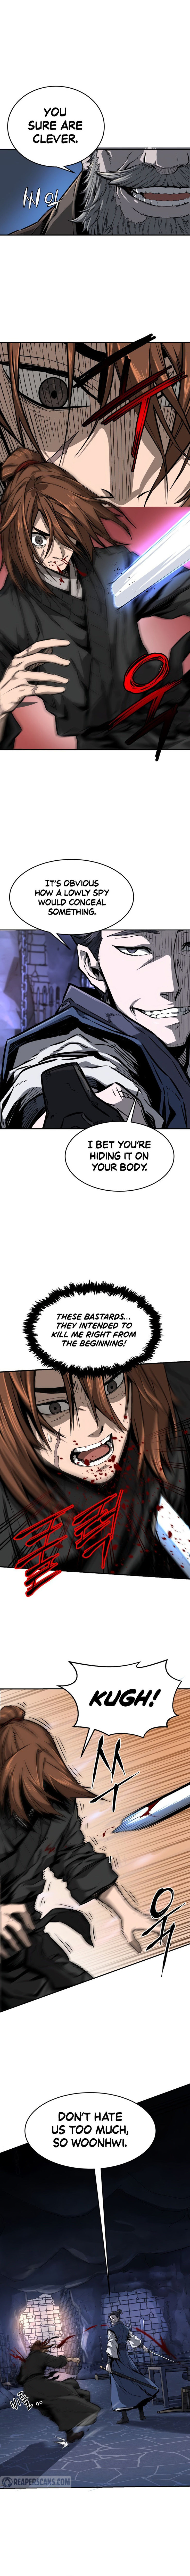 Absolute Sword Sense - Chapter 1 Page 7